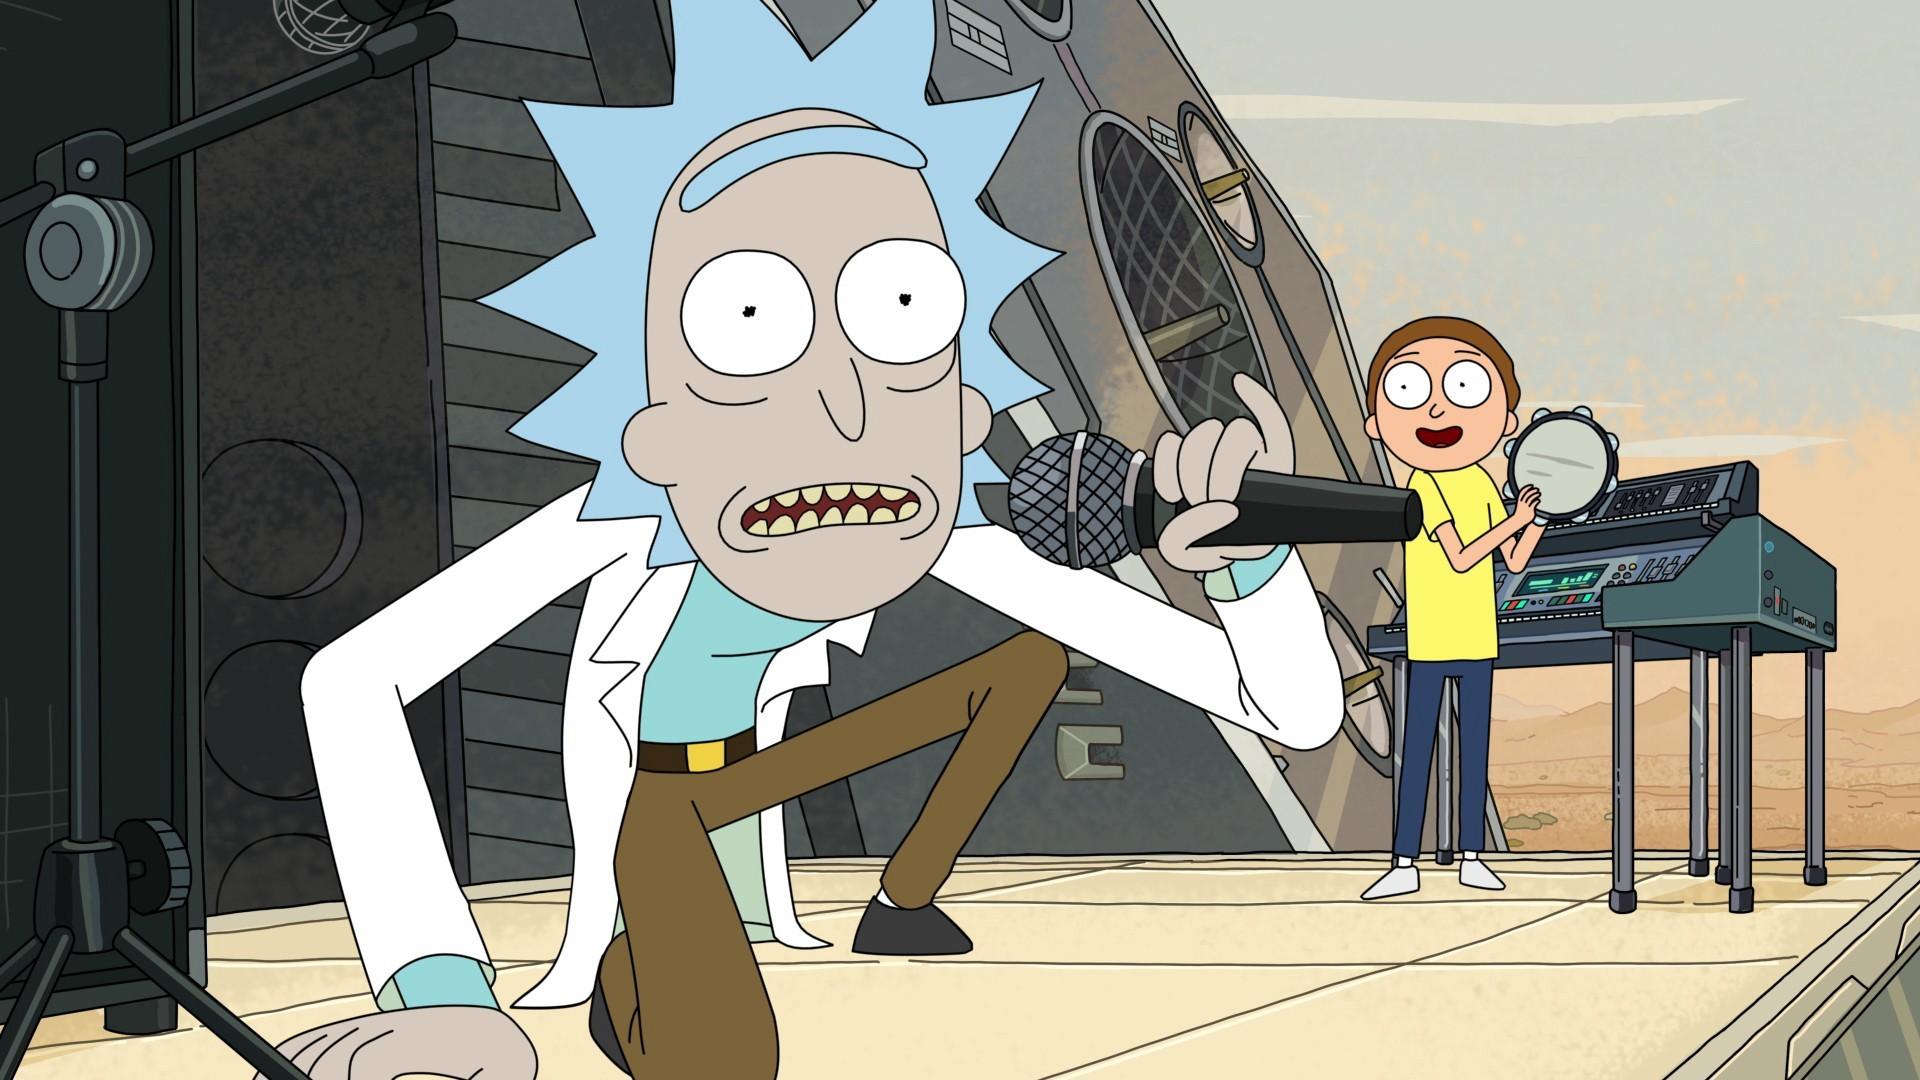 Rick and Morty season 4 release date, cast, trailer, episode